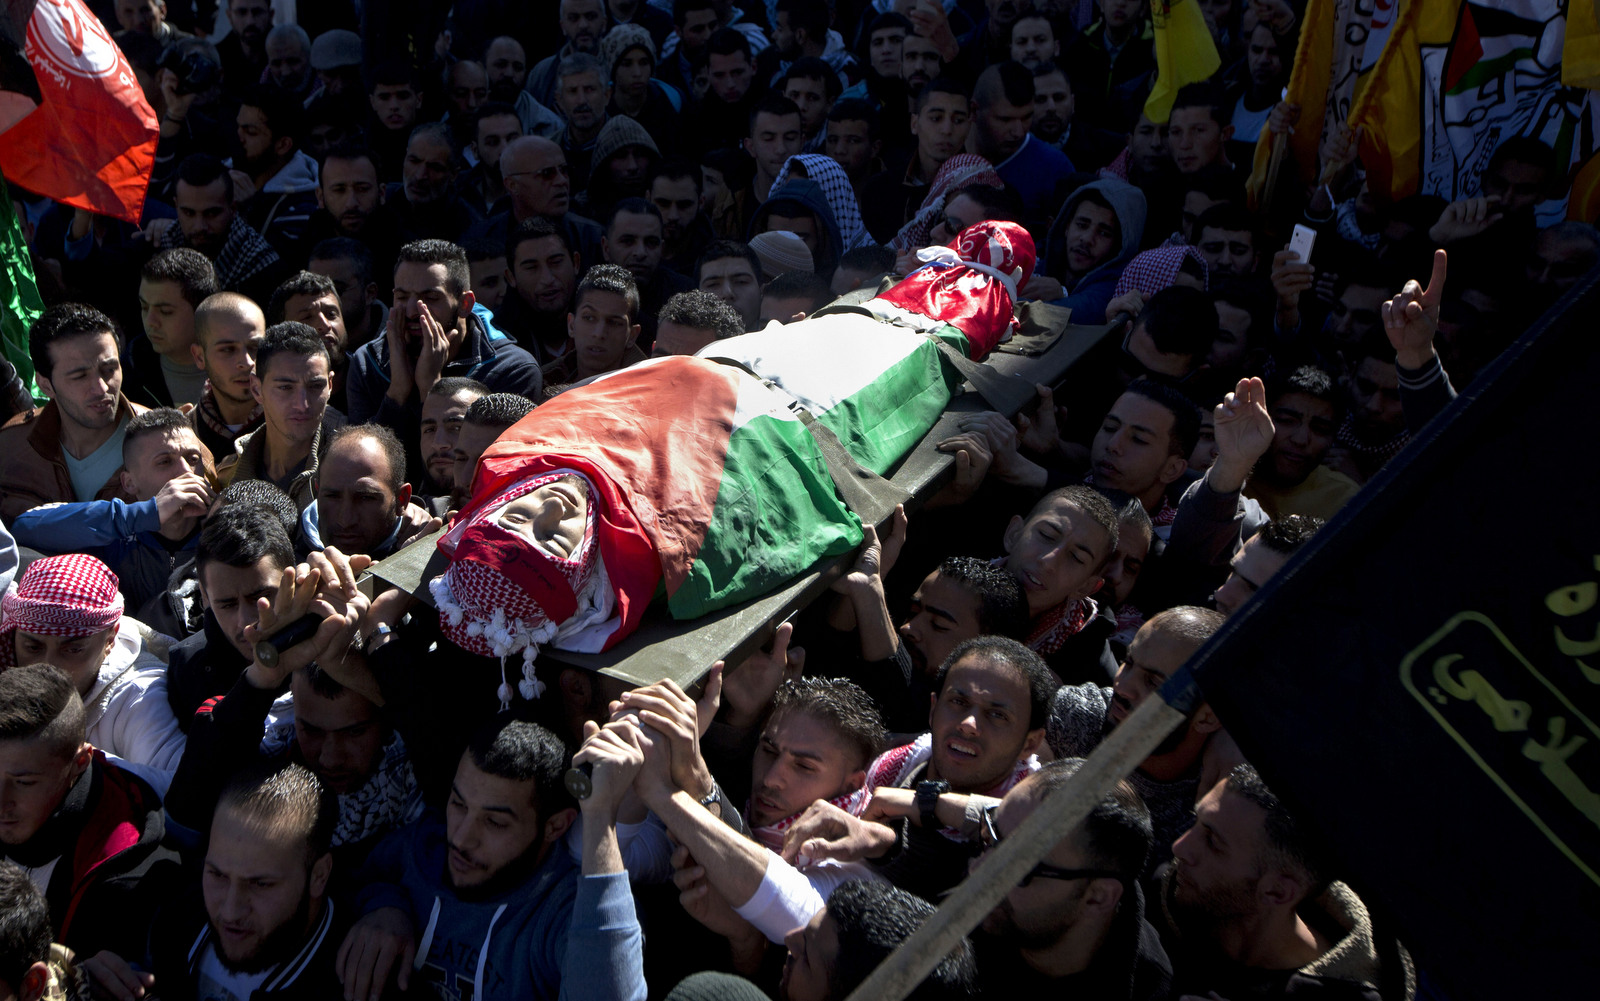 Palestinian mourners carry the body of Malik Shaheen, 21, who was killed by Israeli troops in Deheishe refugee camp near Bethlehem, near the West Bank city of Bethlehem, Tuesday, Dec. 8, 2015. (AP Photo/Majdi Mohammed)